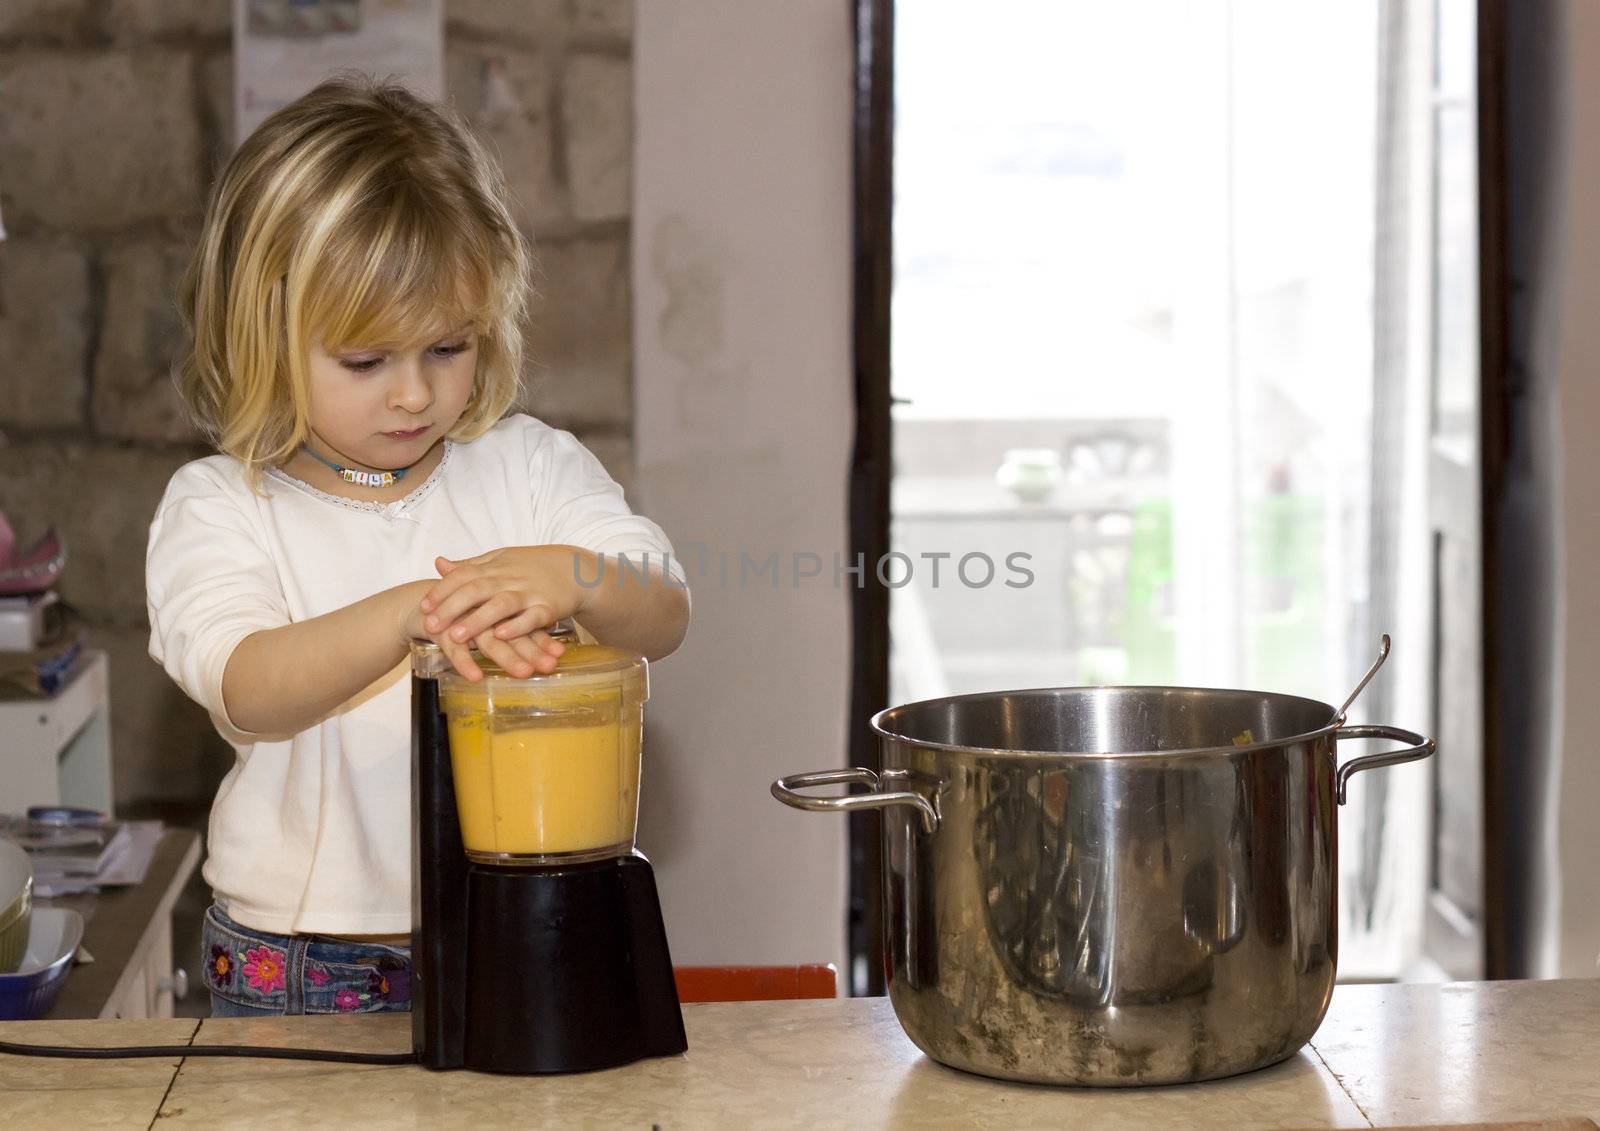 Child cooking by annems